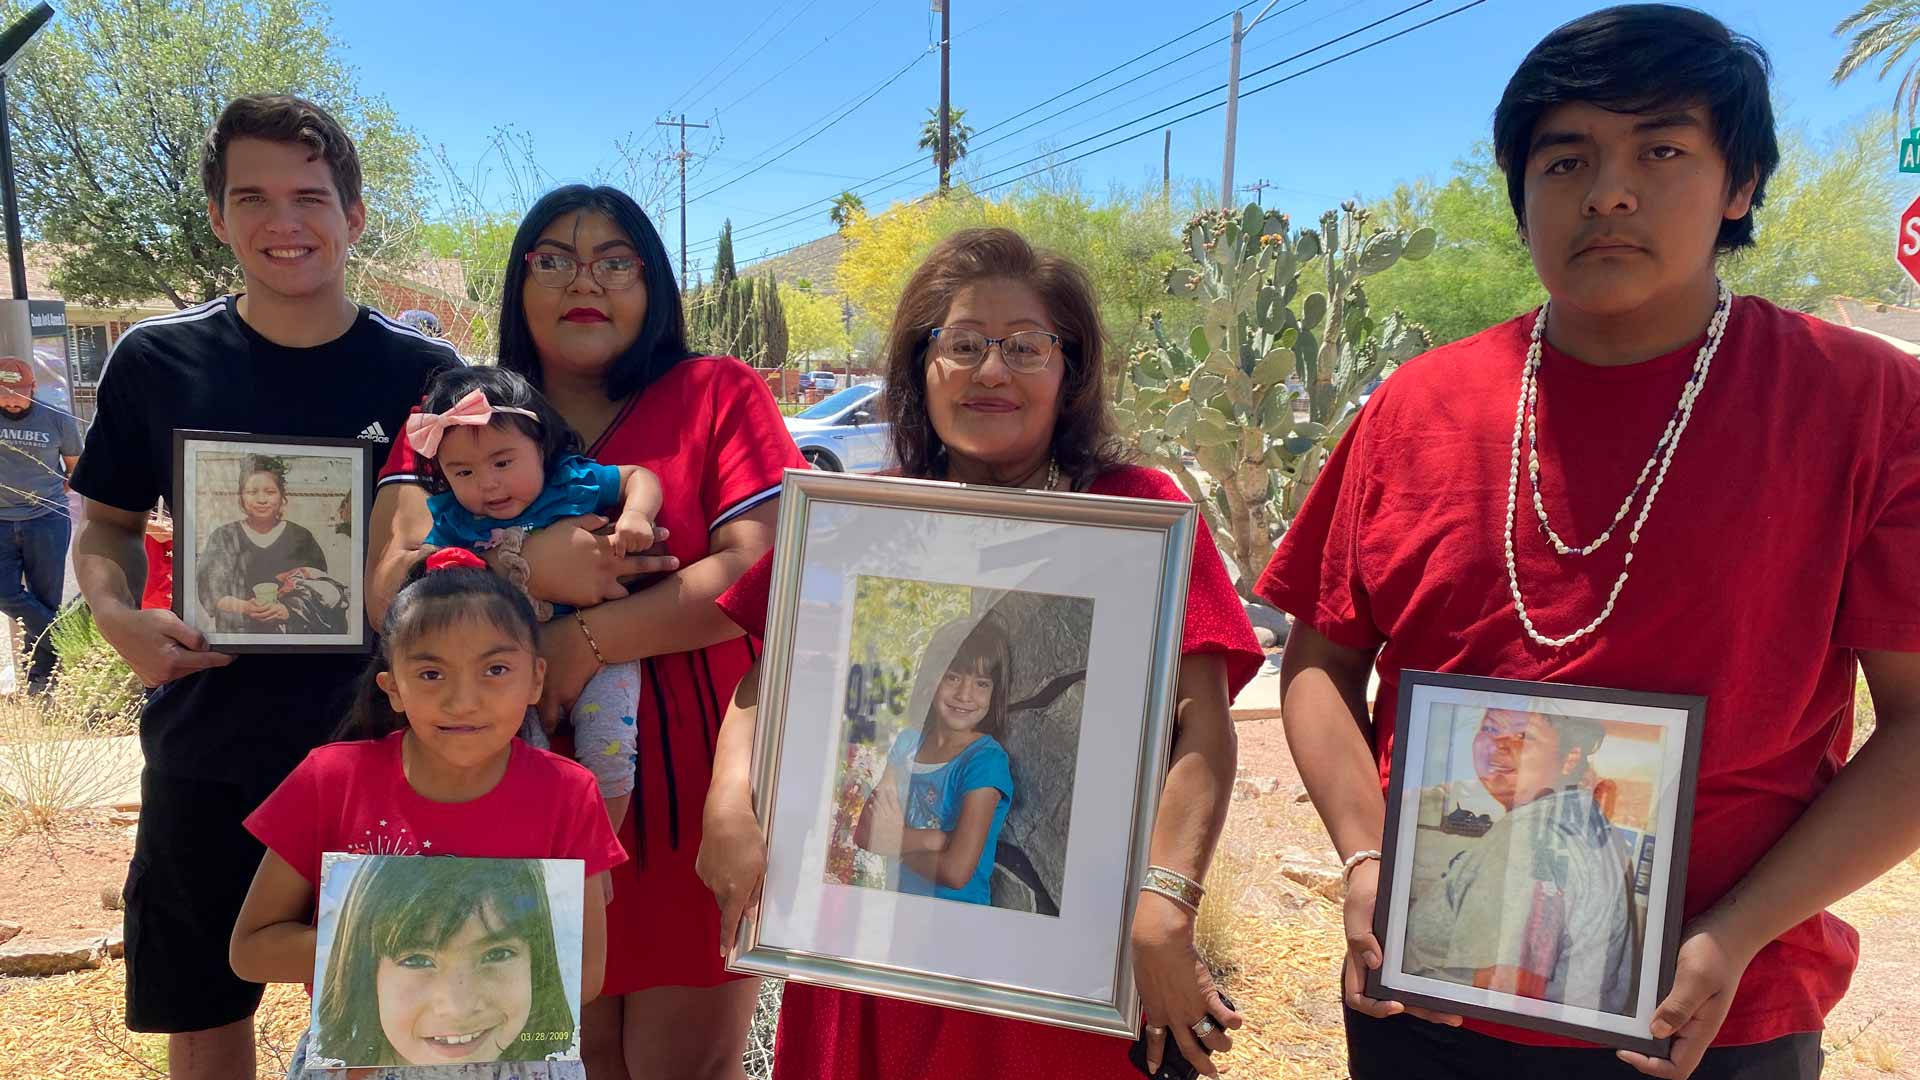 Olivia Rubio poses with her family during a press conference on missing and murdered Indigenous women at Tucson’s Ward 1 office, holding a photo of her granddaughter Rhia Almeida, who was killed in 2009. 